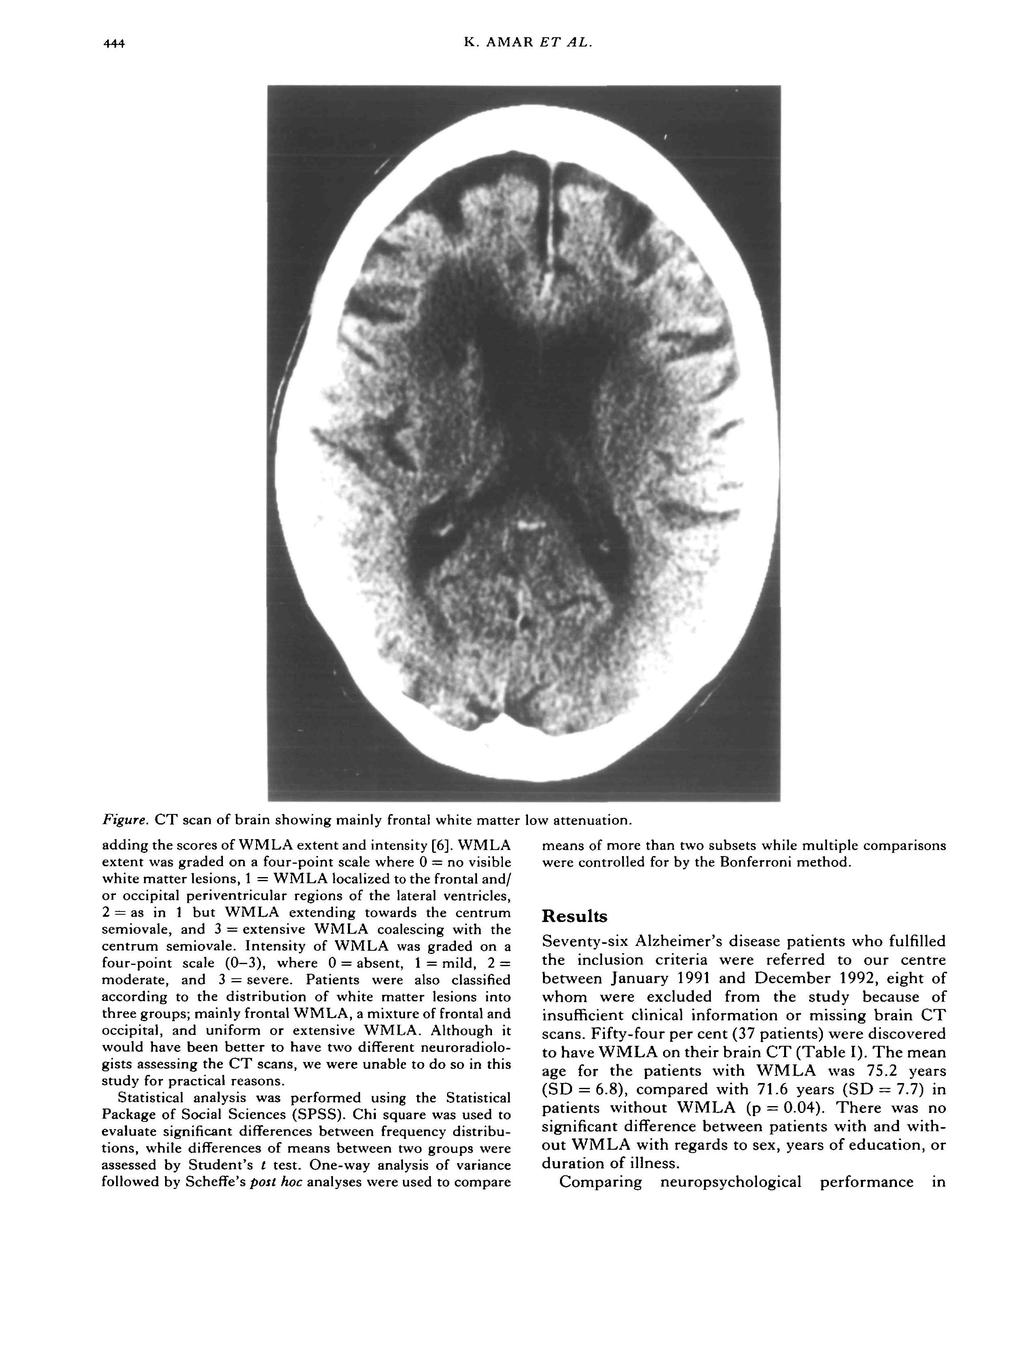 444. K. AMAR ET AL. Figure. CT scan of brain showing mainly frontal white matter low attenuation. adding the scores of WMLA extent and intensity [6].